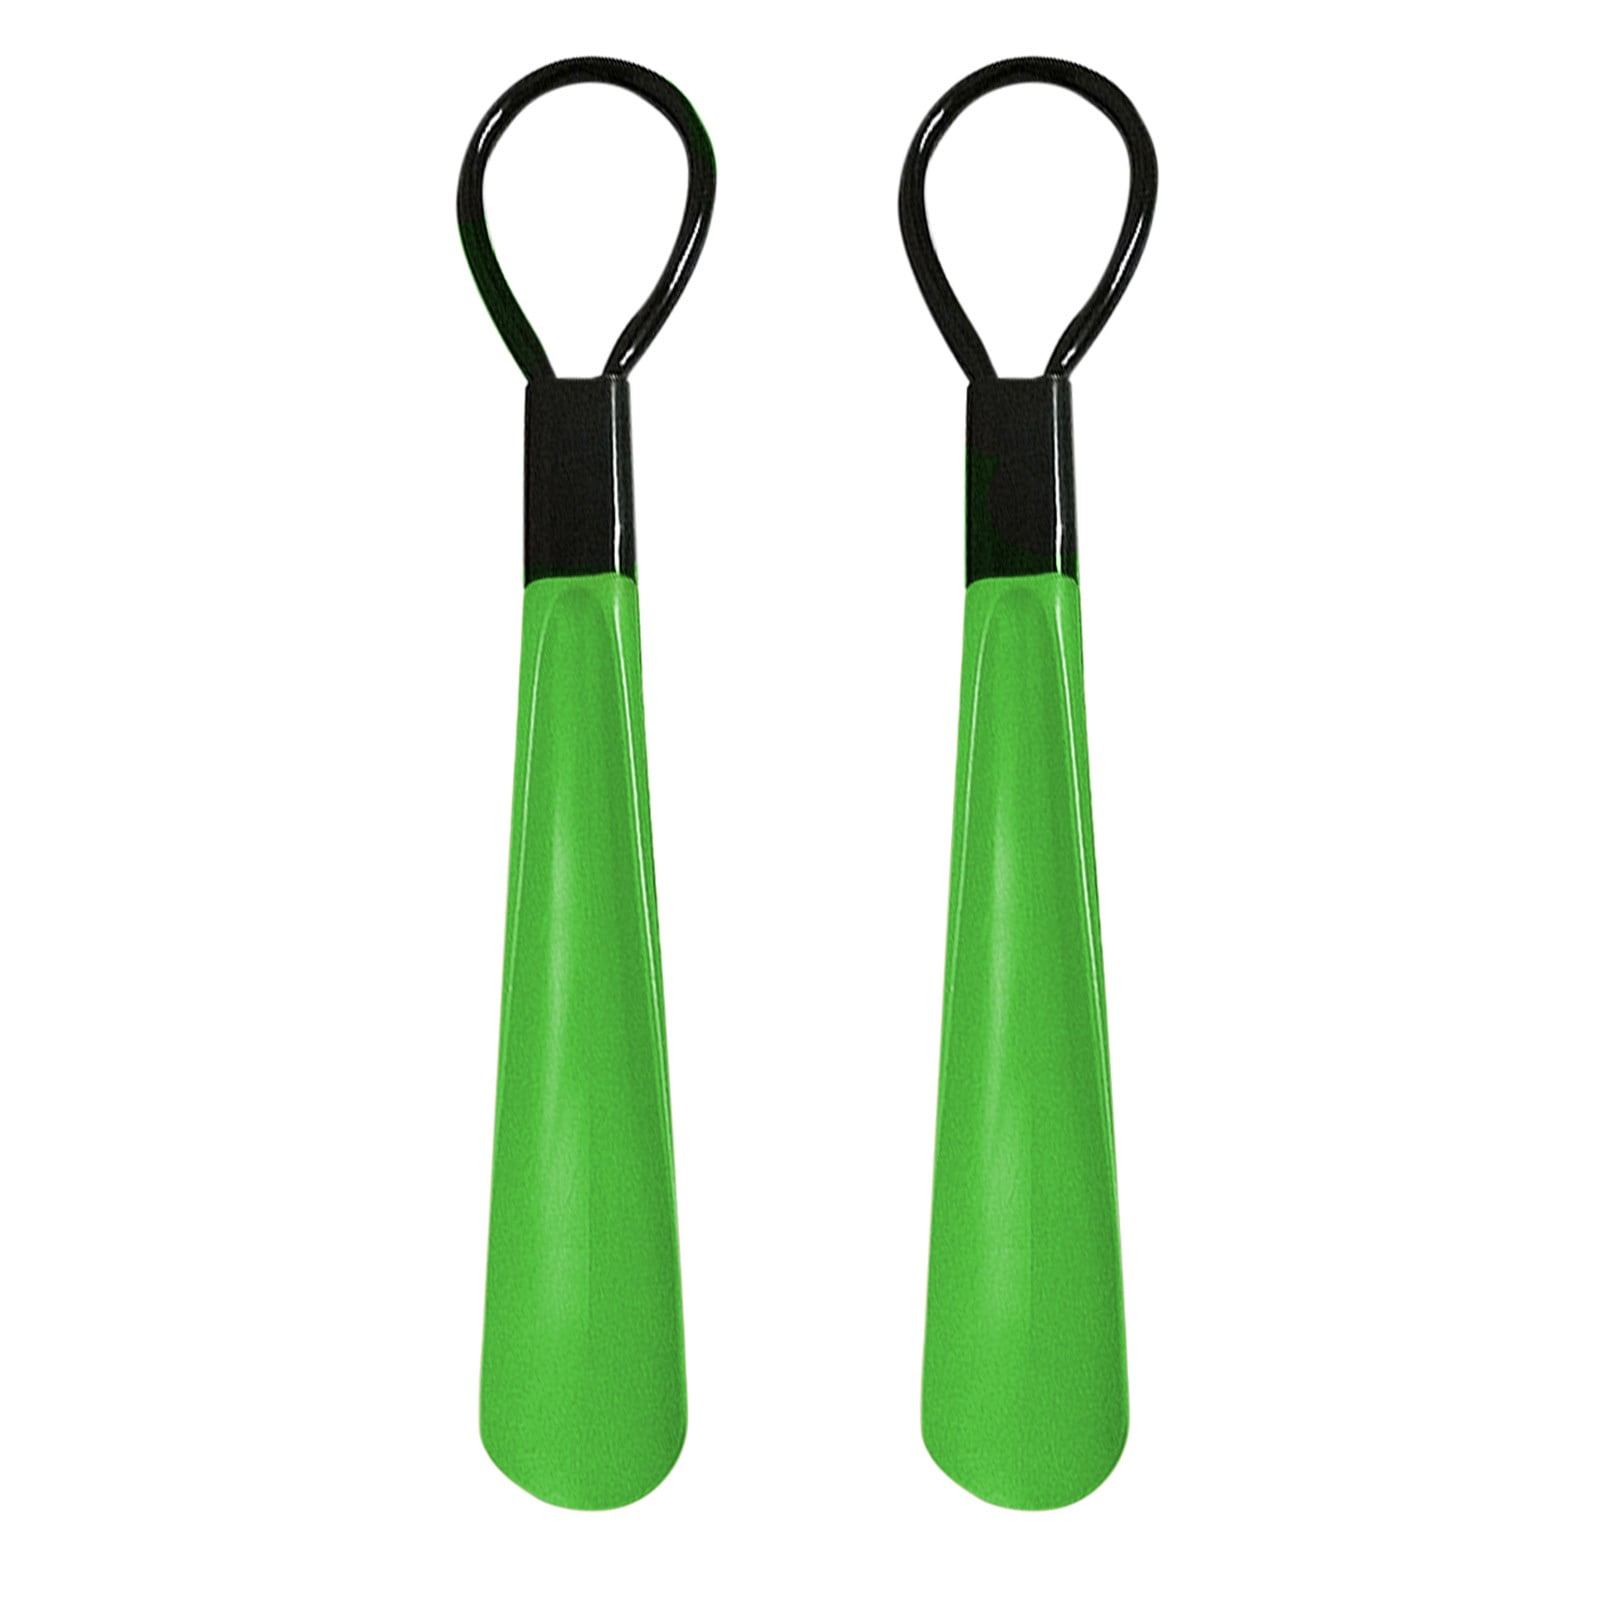 Hibro Adhesive Wall Hangers Peel and Stick 2pcs Lazy Shoe Helper Fits All Shoes Thread Tube Small Shoes Pull Belt Leather Shoes, Size: One size, Green